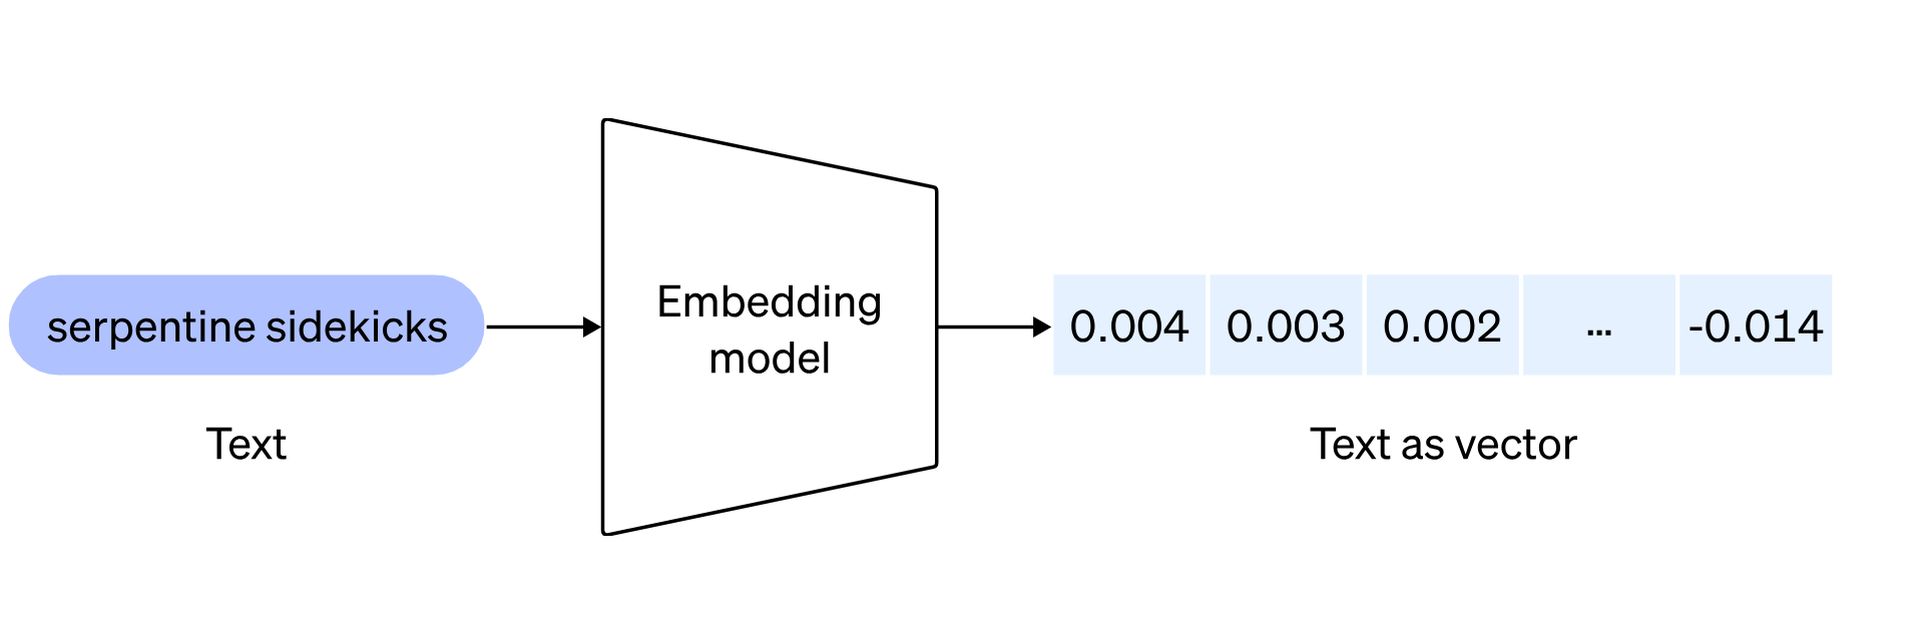 Discover new OpenAI embedding models – text-embedding-3-small and text-embedding-3-large – enhanced affordability, performance, and more!